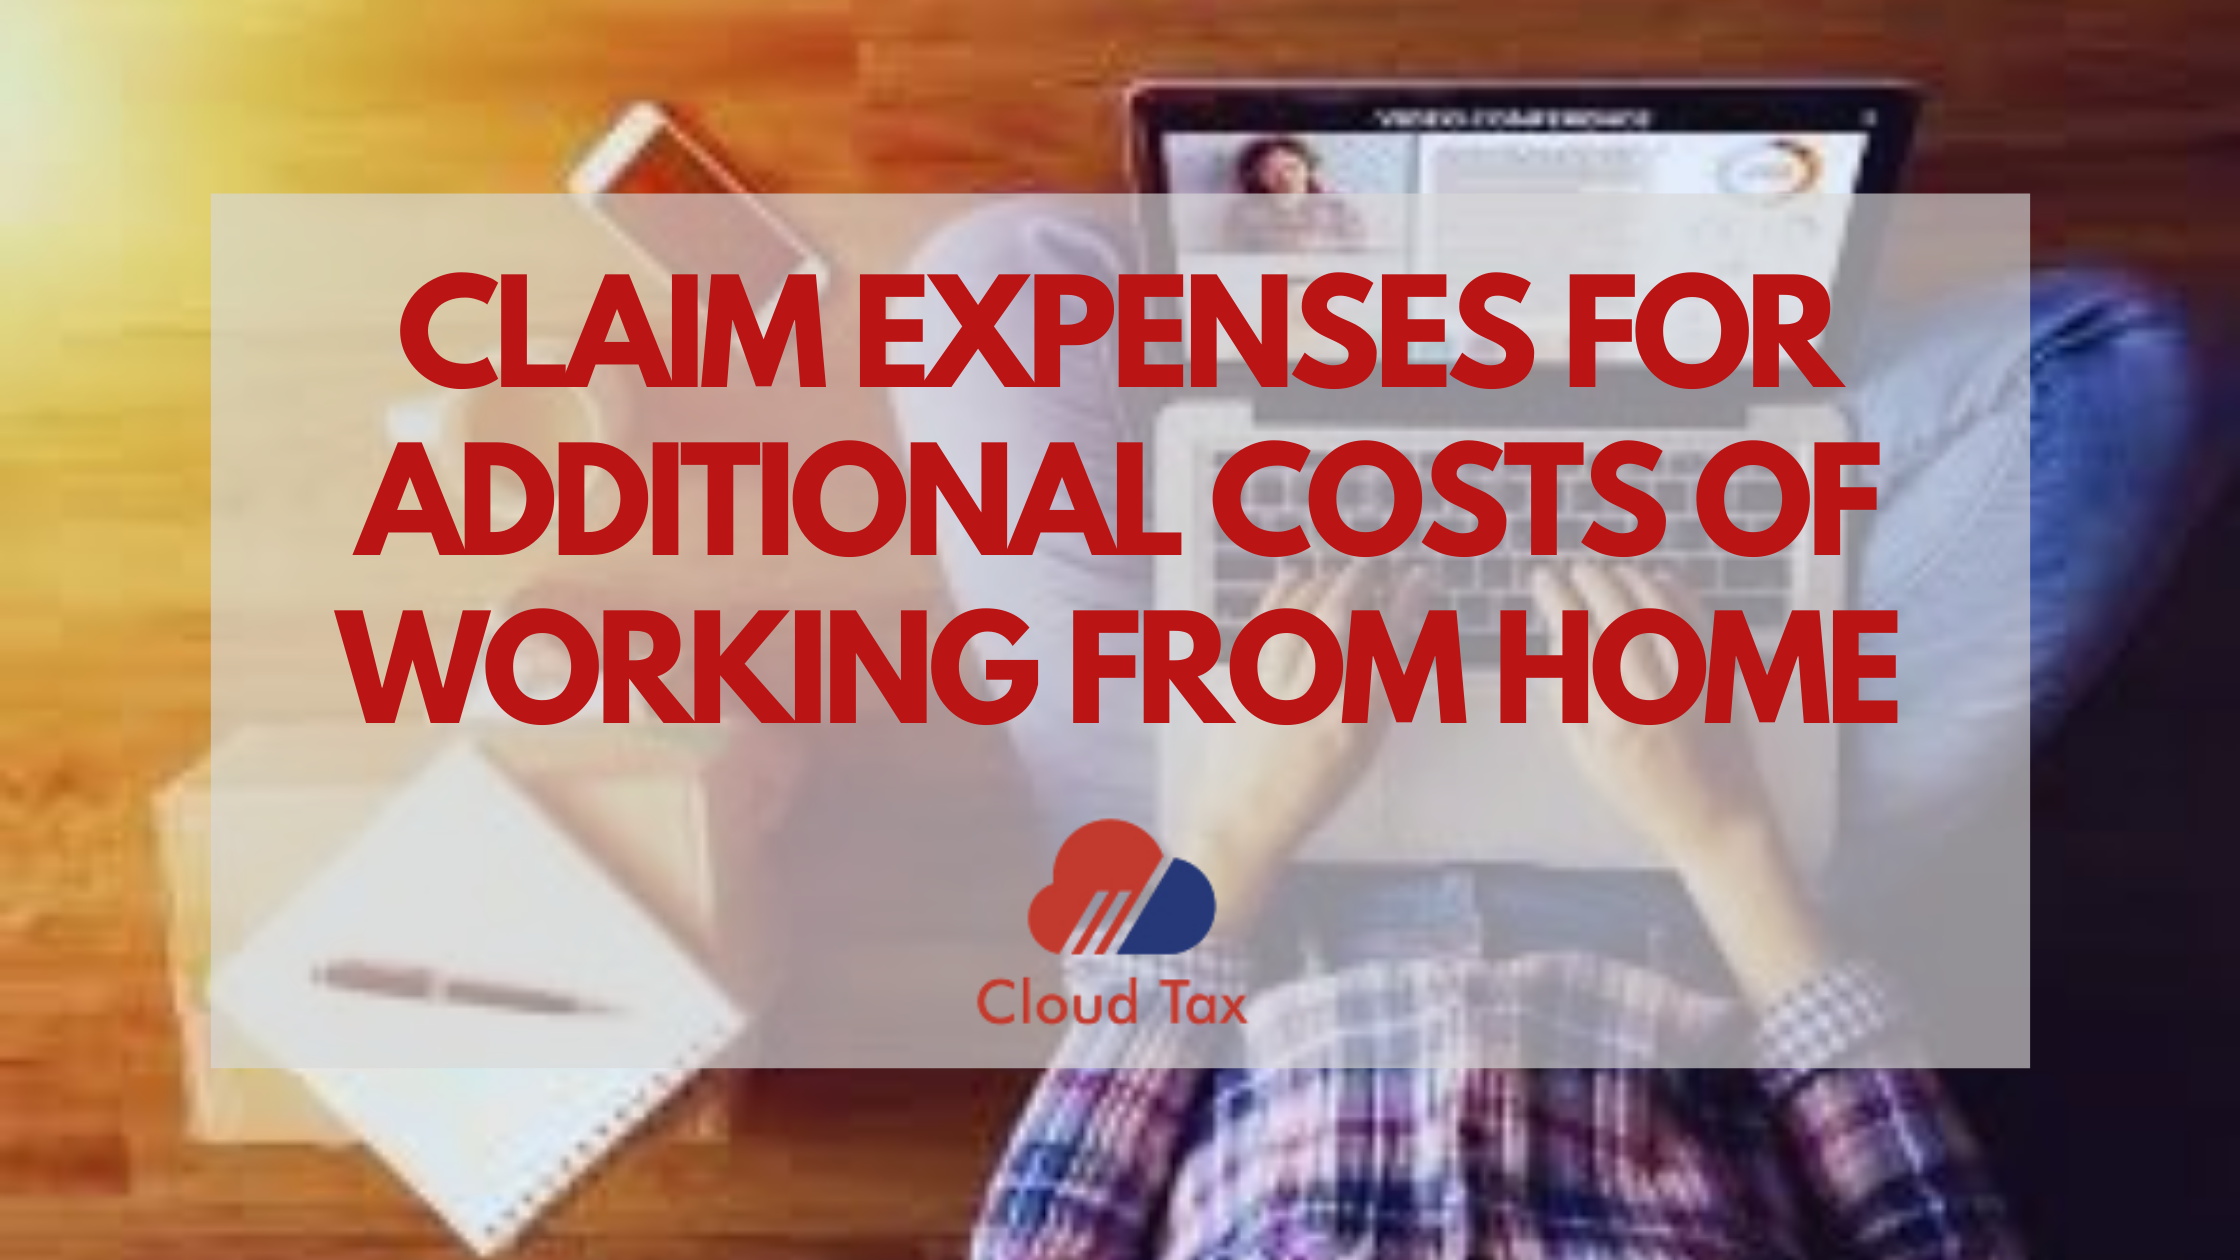 Claim expenses for additional costs of working from home